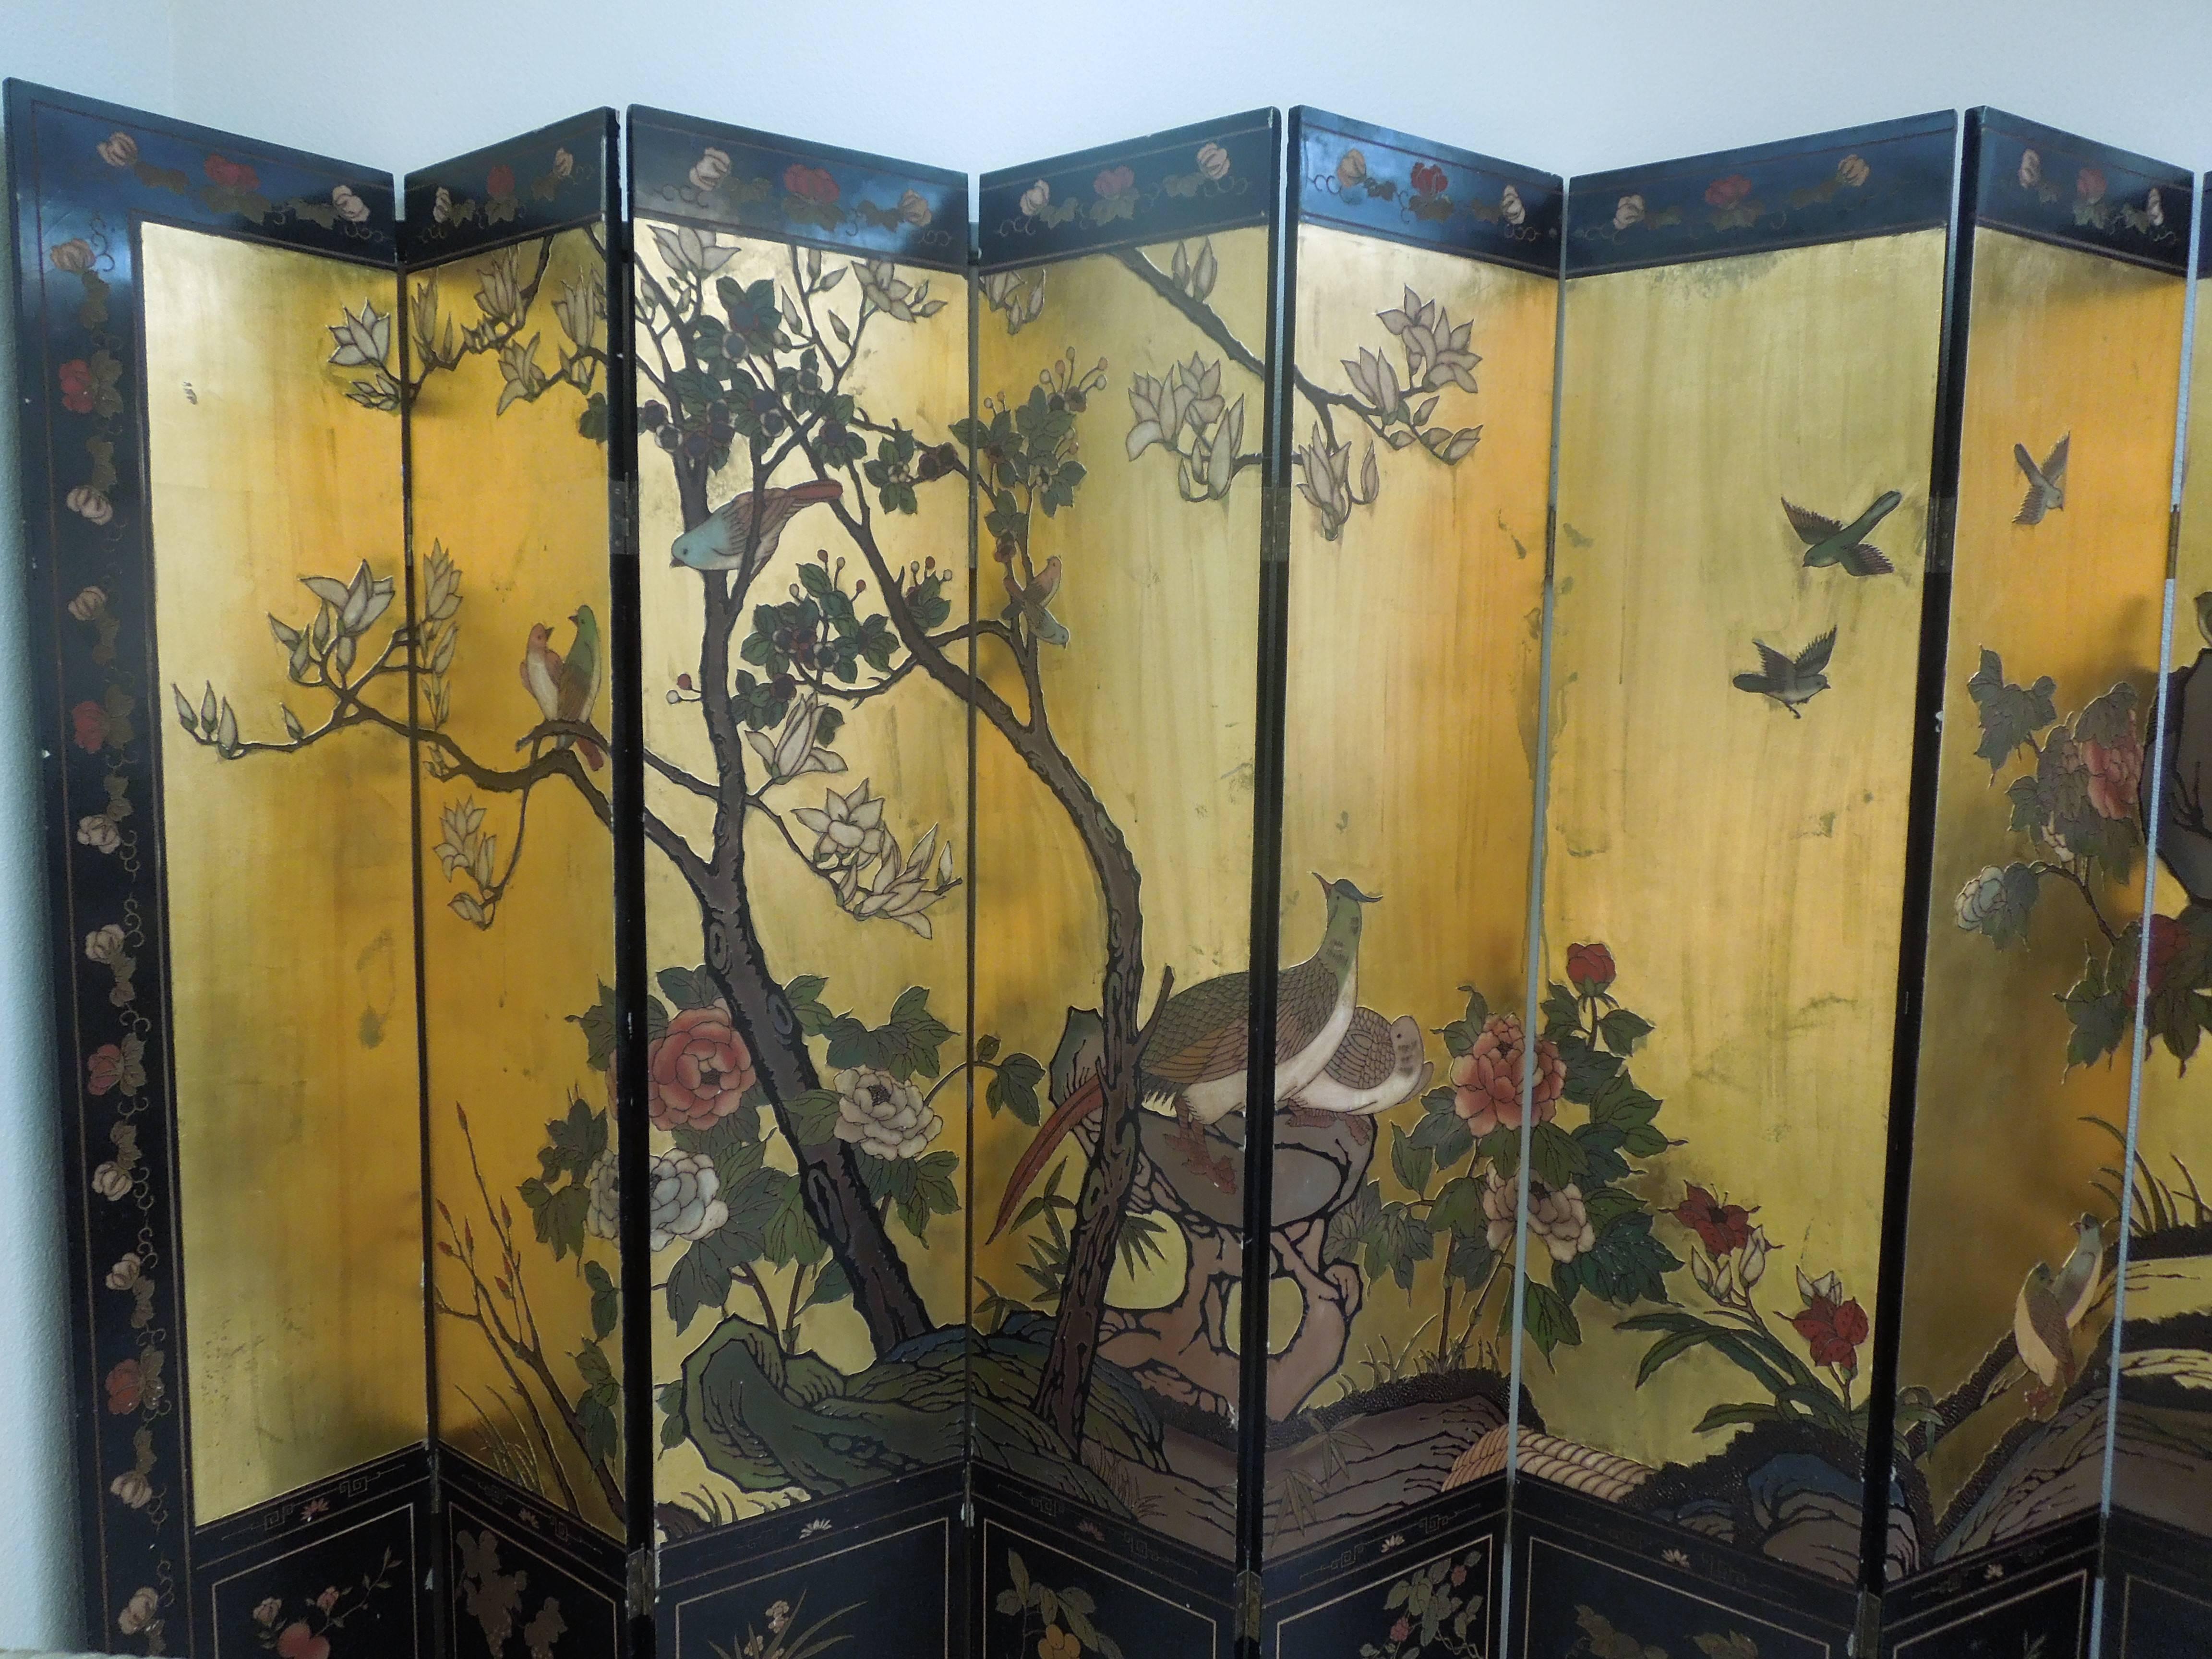 A unusual and very chic Chinese Coromandel eight-panel screen from the late 1940s. Beautiful carved detail in a very subtle, soothing floral and bird motif on antiqued color gold leaf. Framed on bottom with black squares that have a simple florals.